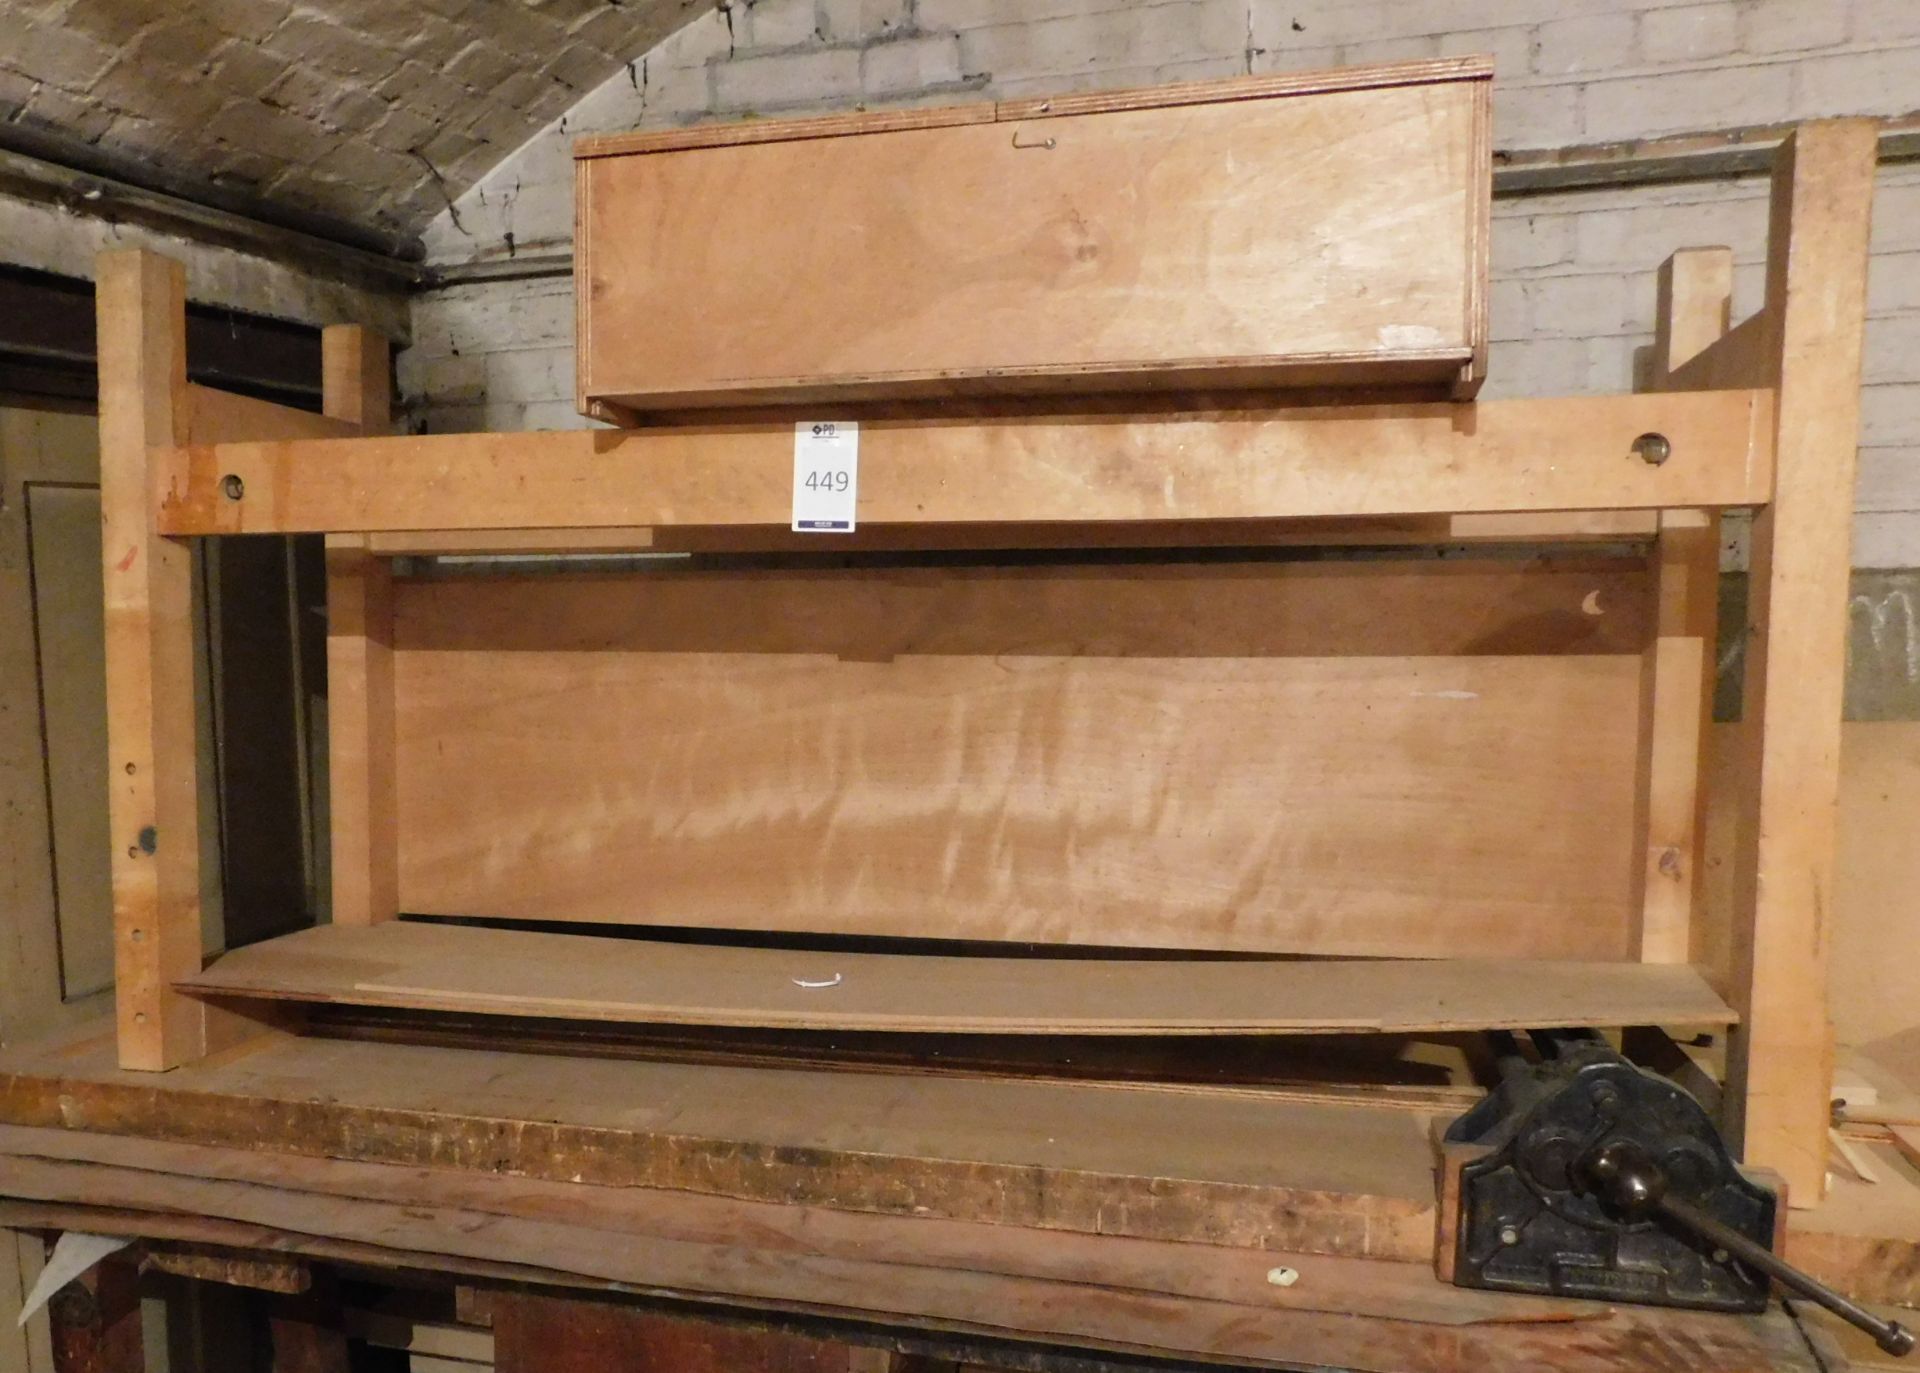 Carpenter’s Benches with Record Vice, excludes copper sheets (Located Bethnal Green – Please see